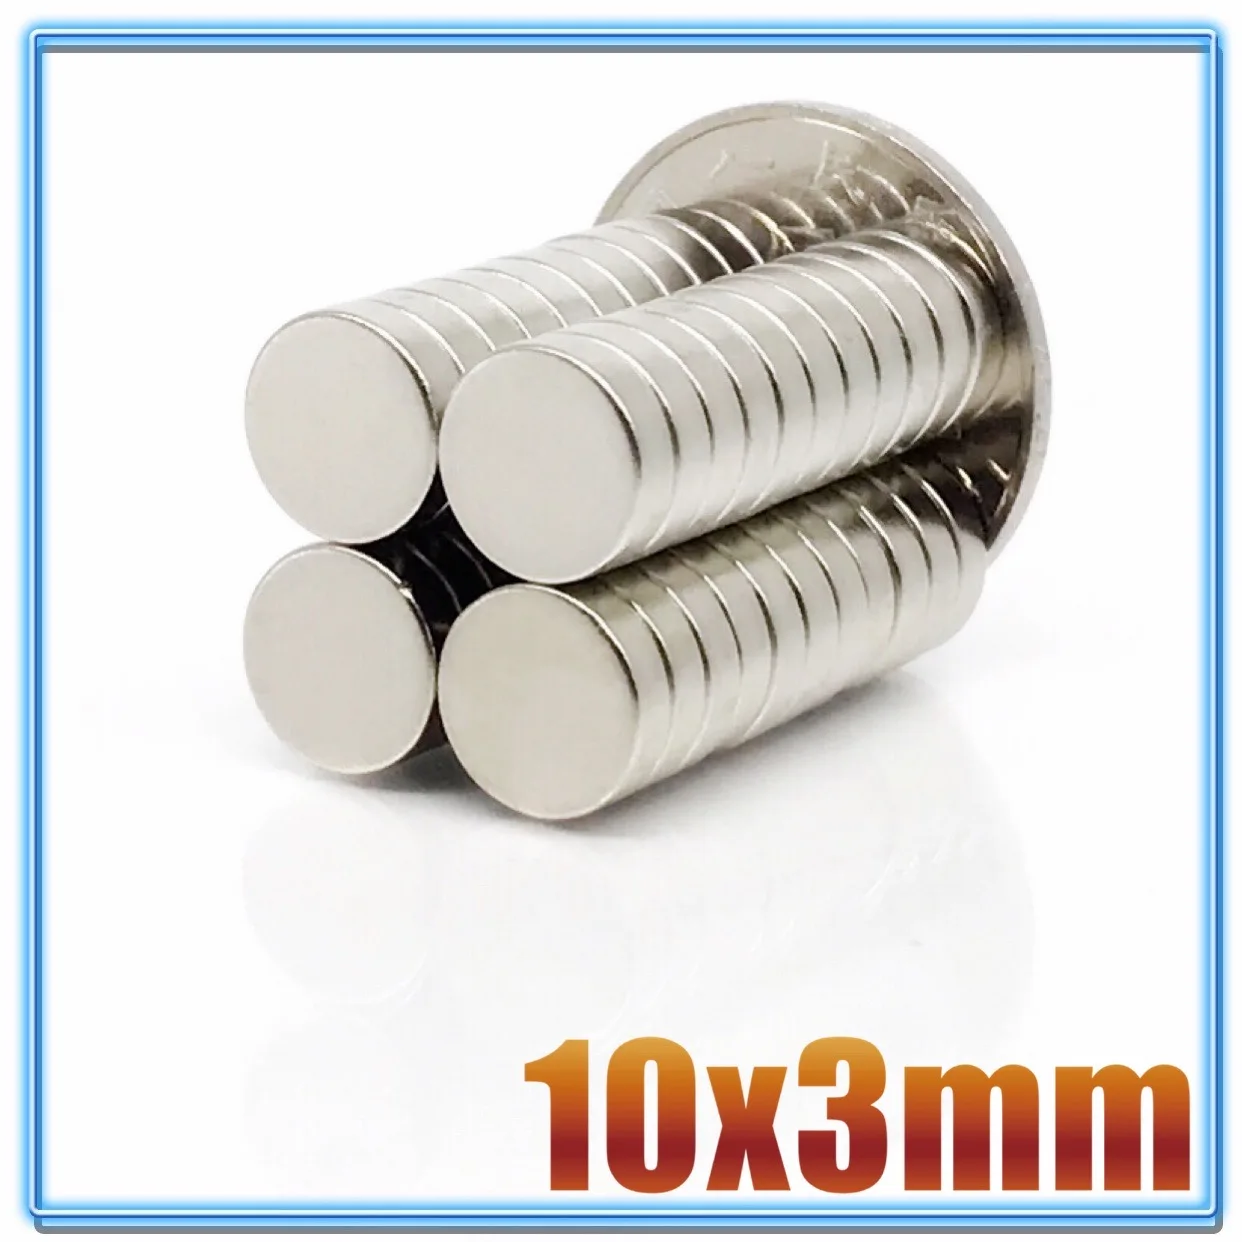 20-500Pcs 10x3 Neodymium Magnet 10mm x 3mm N35 NdFeB Round Super Powerful Strong Permanent Magnetic imanes Disc 10*3